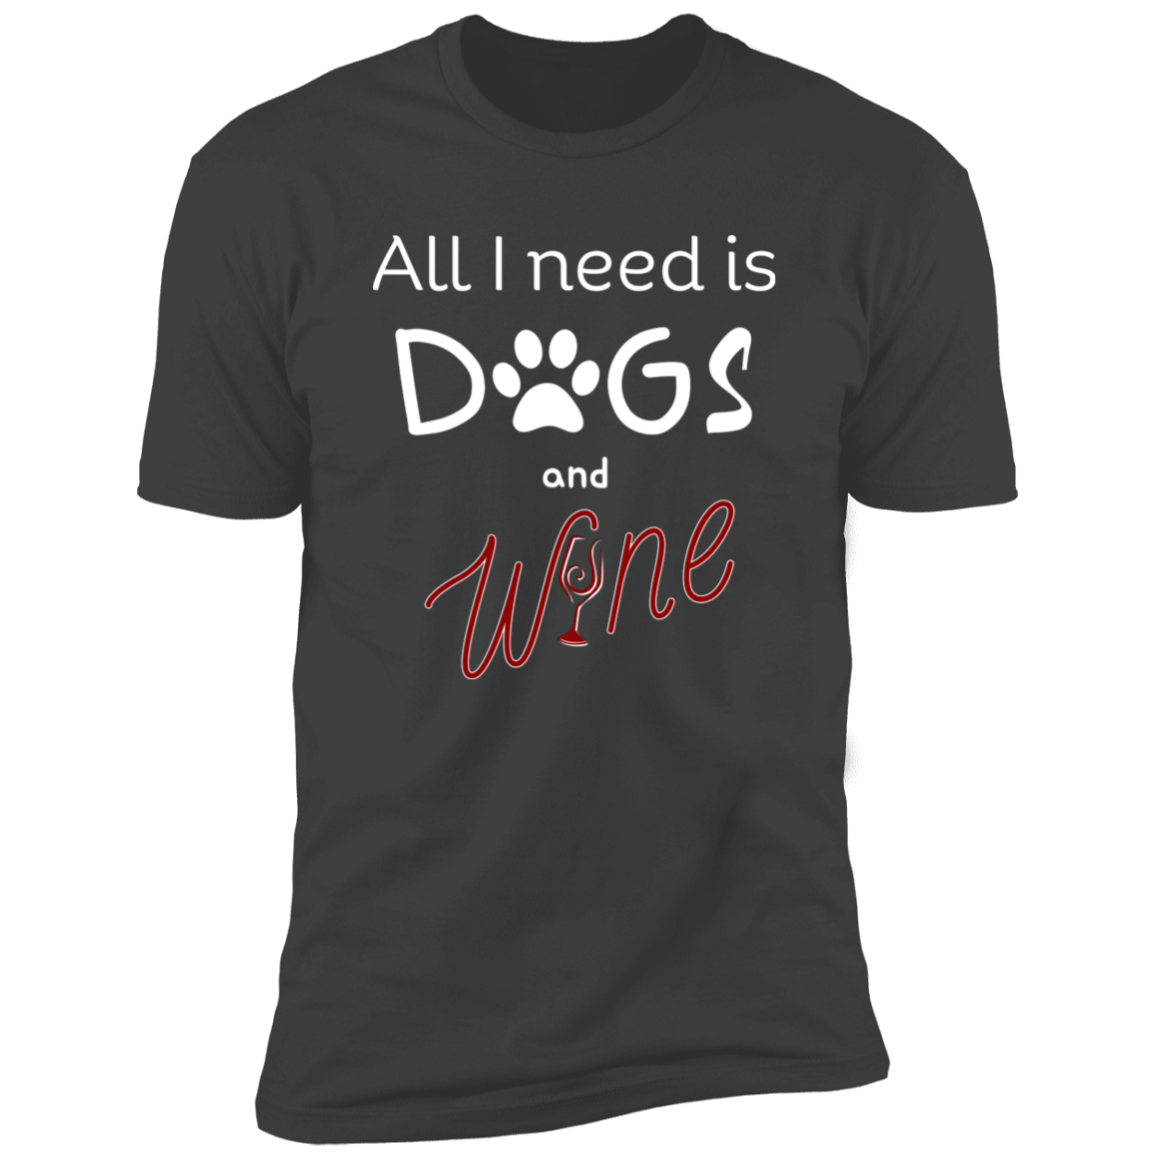 All I Need is Dogs and Wine T-shirt, Dog Shirt for humans, in heavy metal gray